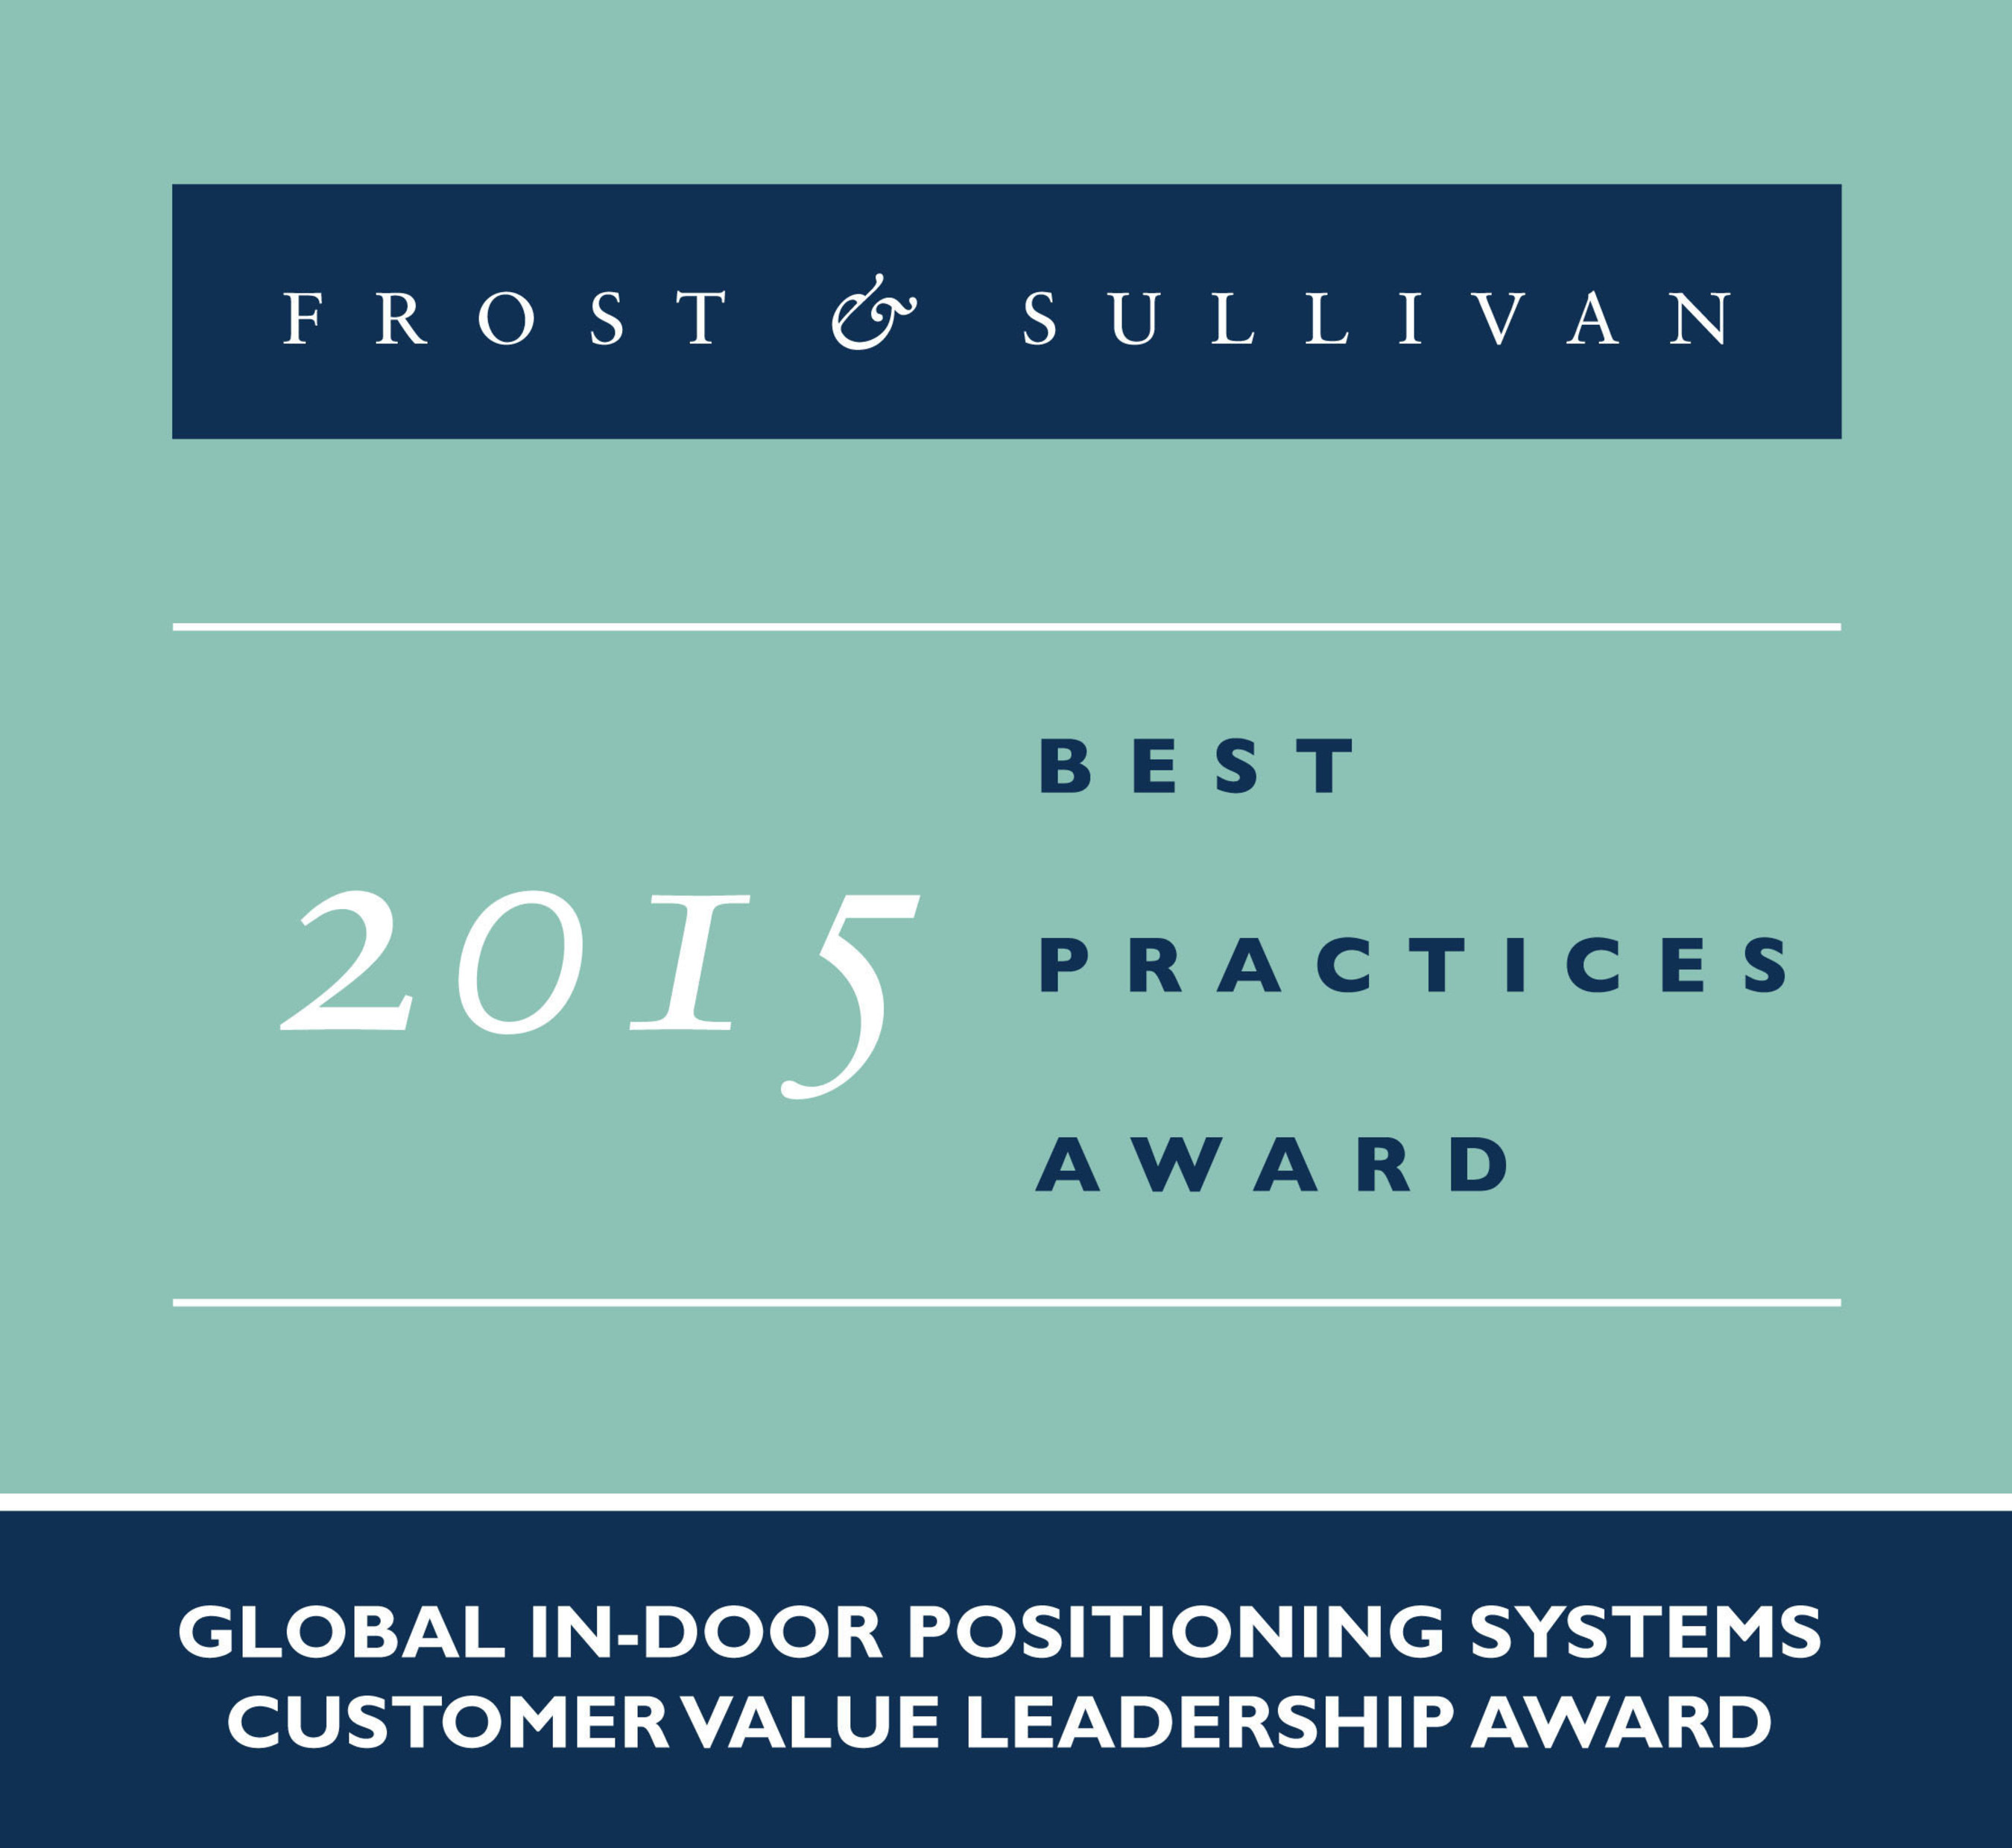 DecaWave recognized with the Frost & Sullivan 2015 Global In-door Positioning Systems Customer Value Leadership Award.